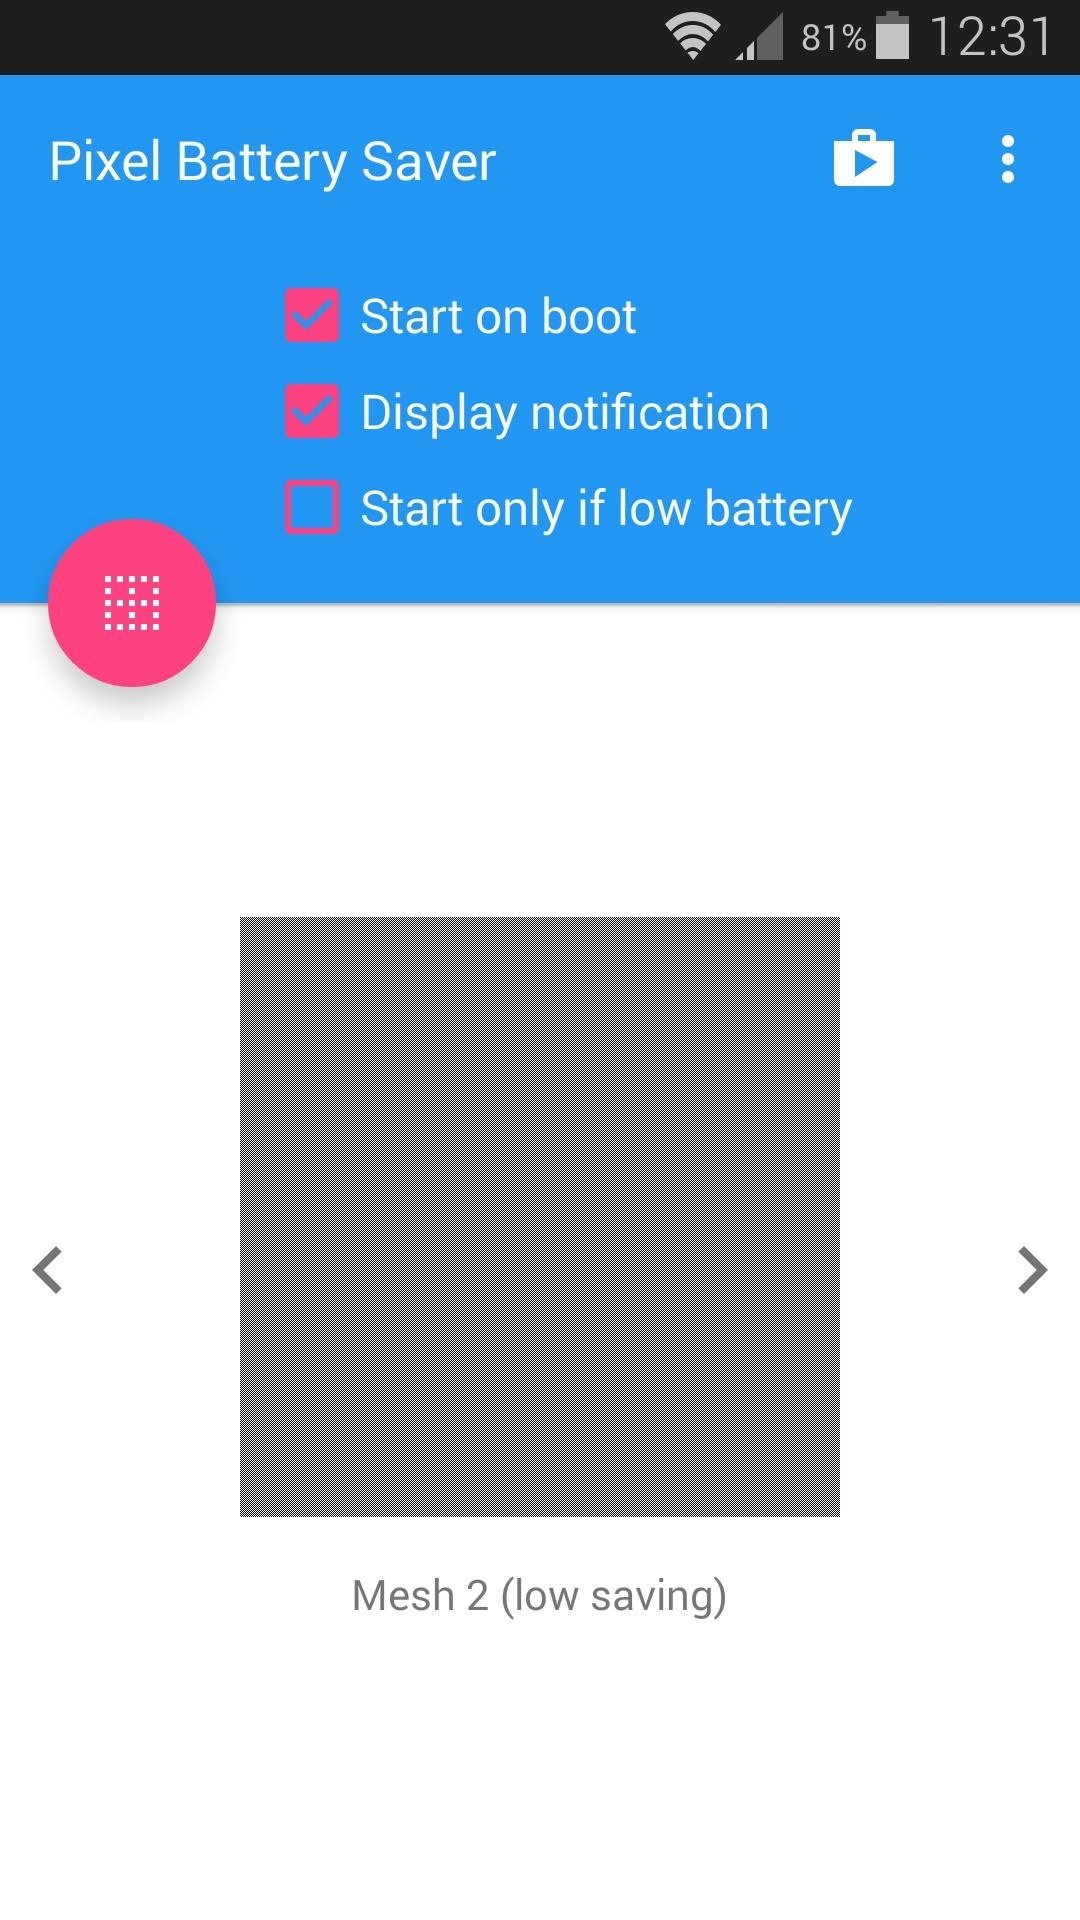 Save Battery Life on Android by Turning Off Pixels (No Root Required)